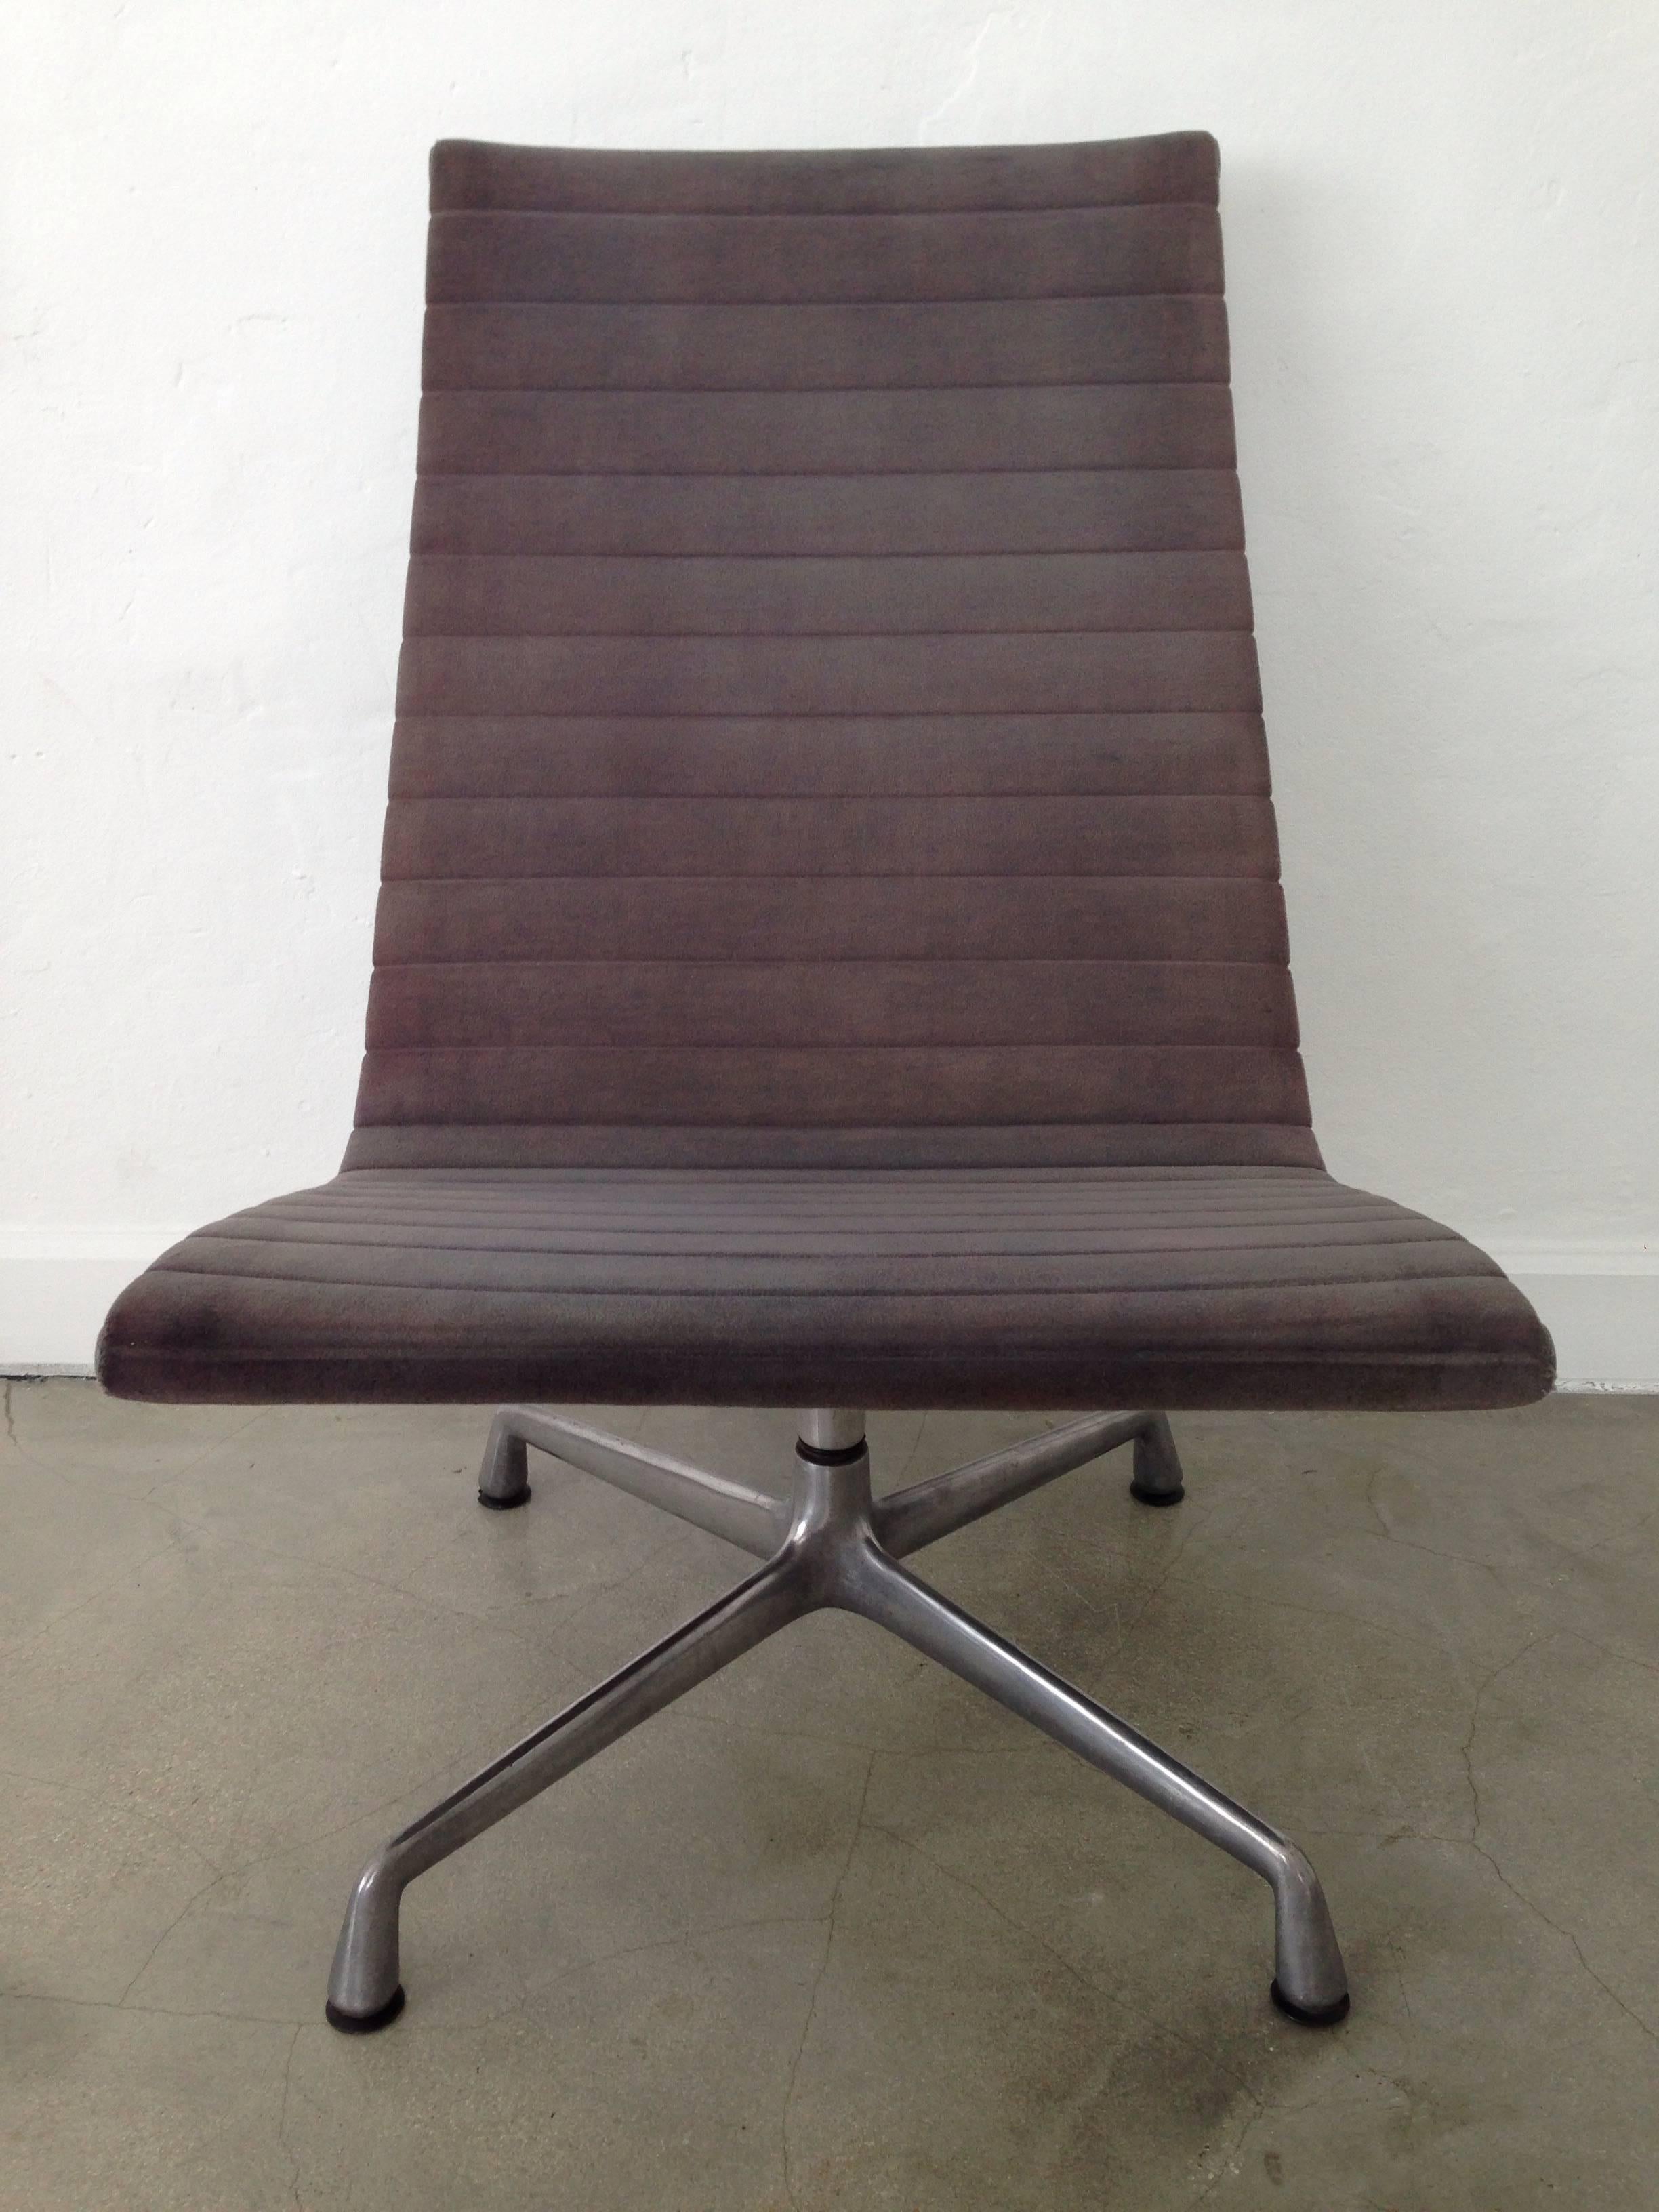 Original 1970s EA33 aluminium group lounge chair in Knoll Hopsack fabric designed by Charles and Ray Eames for Herman Miller, signed. Re-upholstery included with customers own material.